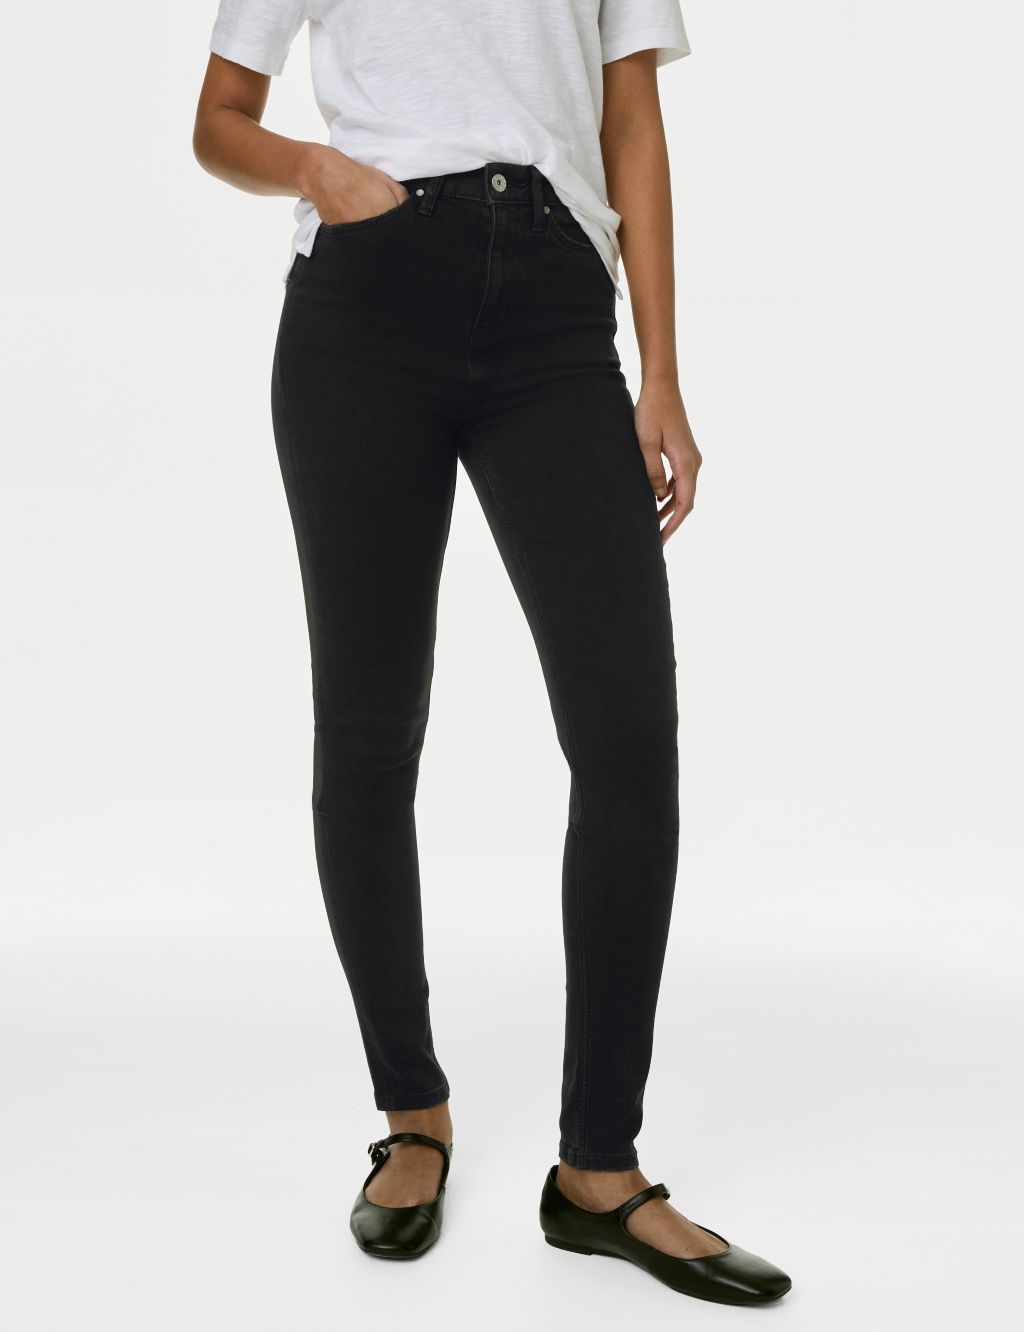 Ivy Supersoft High Waisted Skinny Jeans image 2